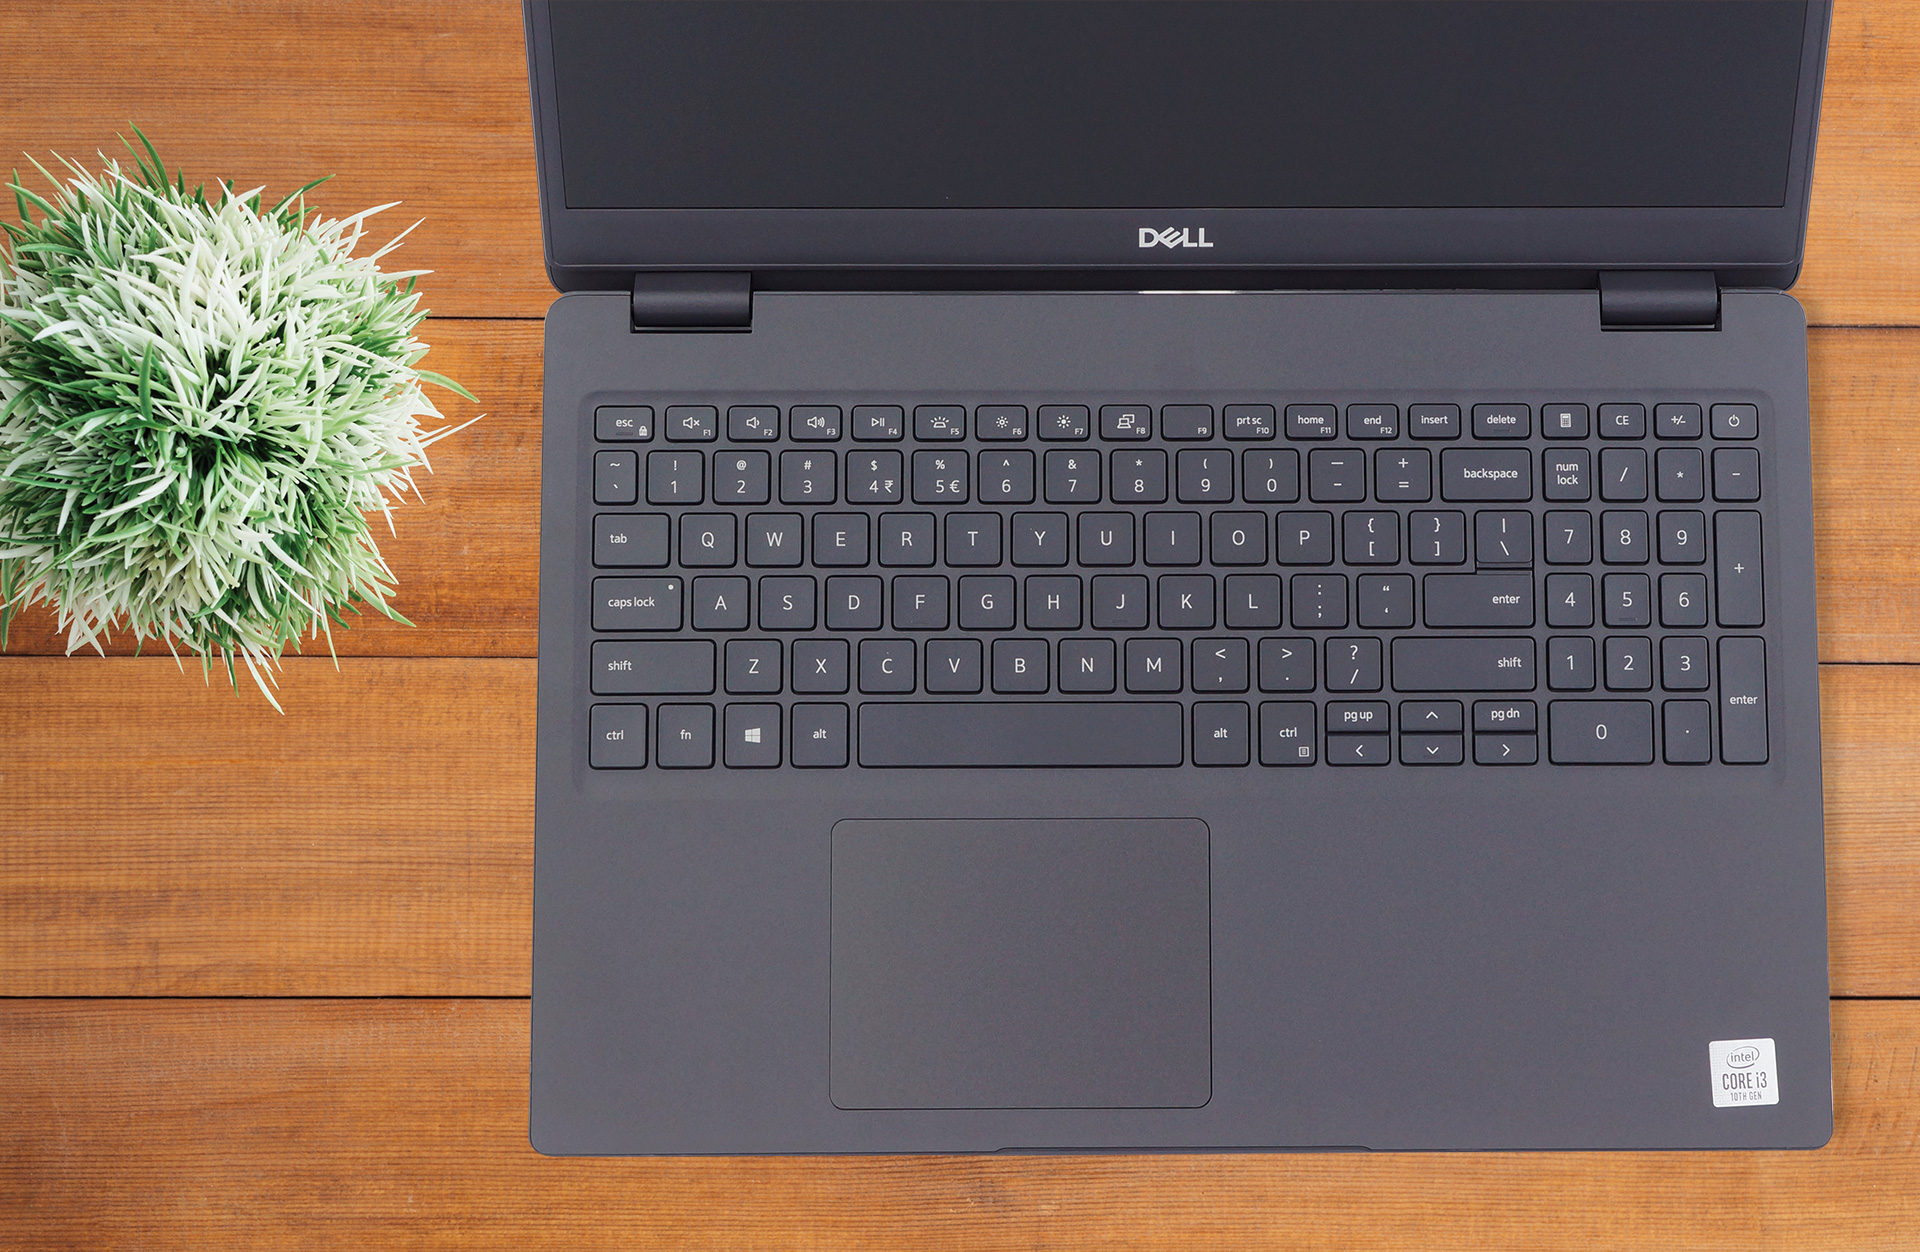 Dell Latitude 15 3510 review - a business notebook dressed in plastic |  LaptopMedia.com